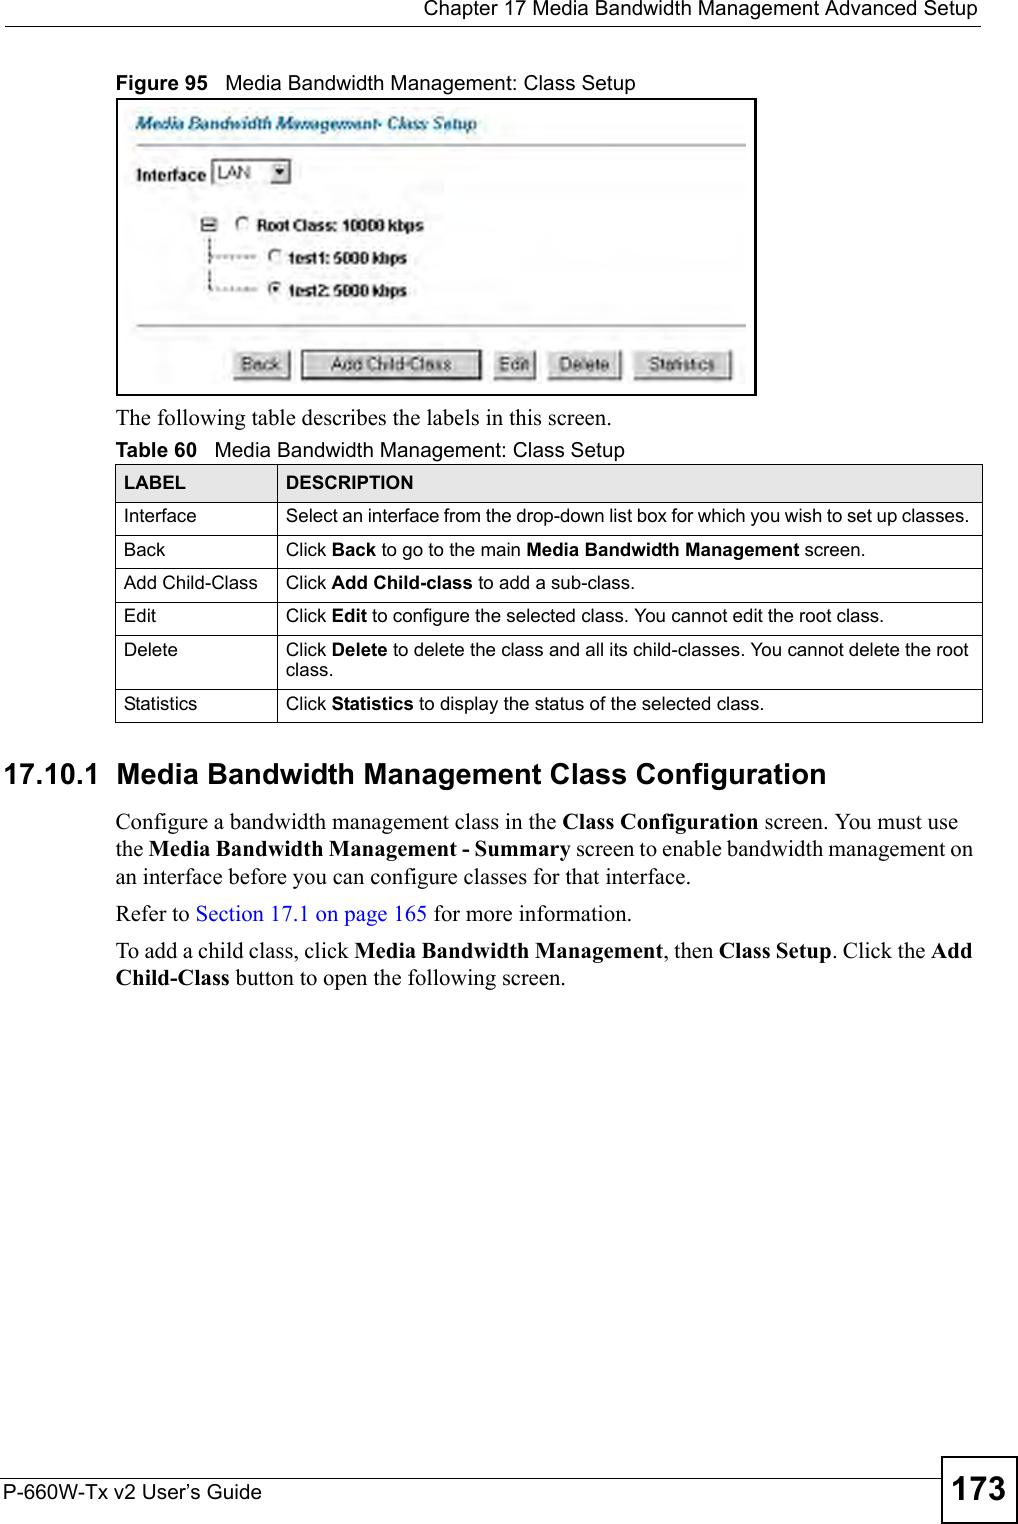  Chapter 17 Media Bandwidth Management Advanced SetupP-660W-Tx v2 User’s Guide 173Figure 95   Media Bandwidth Management: Class SetupThe following table describes the labels in this screen.  17.10.1  Media Bandwidth Management Class Configuration   Configure a bandwidth management class in the Class Configuration screen. You must use the Media Bandwidth Management - Summary screen to enable bandwidth management on an interface before you can configure classes for that interface.Refer to Section 17.1 on page 165 for more information. To add a child class, click Media Bandwidth Management, then Class Setup. Click the Add Child-Class button to open the following screen.Table 60   Media Bandwidth Management: Class SetupLABEL DESCRIPTIONInterface Select an interface from the drop-down list box for which you wish to set up classes. Back Click Back to go to the main Media Bandwidth Management screen.Add Child-Class Click Add Child-class to add a sub-class. Edit Click Edit to configure the selected class. You cannot edit the root class.Delete Click Delete to delete the class and all its child-classes. You cannot delete the root class.Statistics Click Statistics to display the status of the selected class.